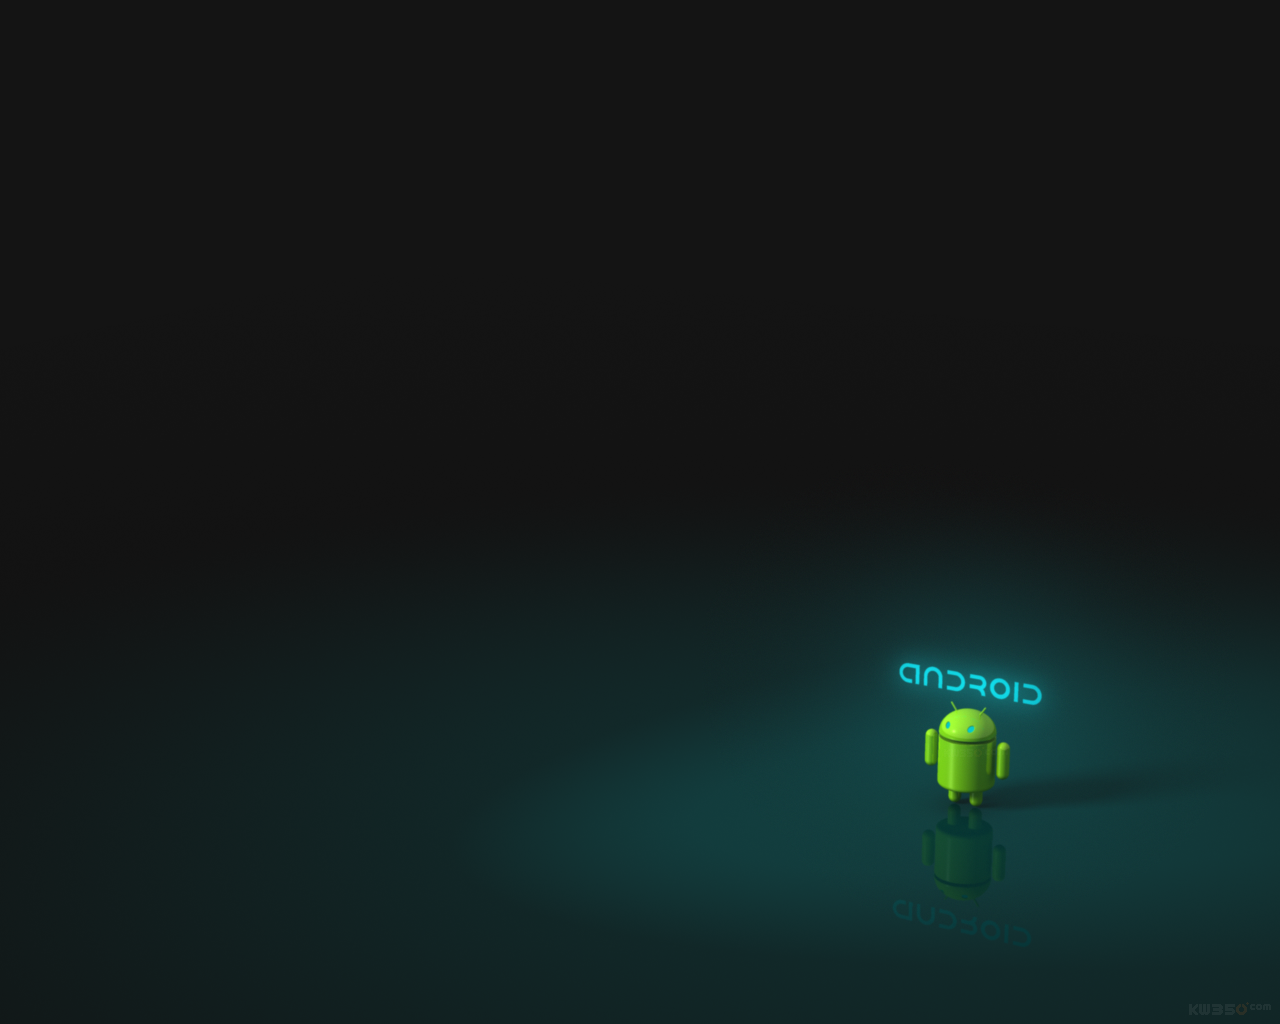 Cool Android Themed Wallpaper For